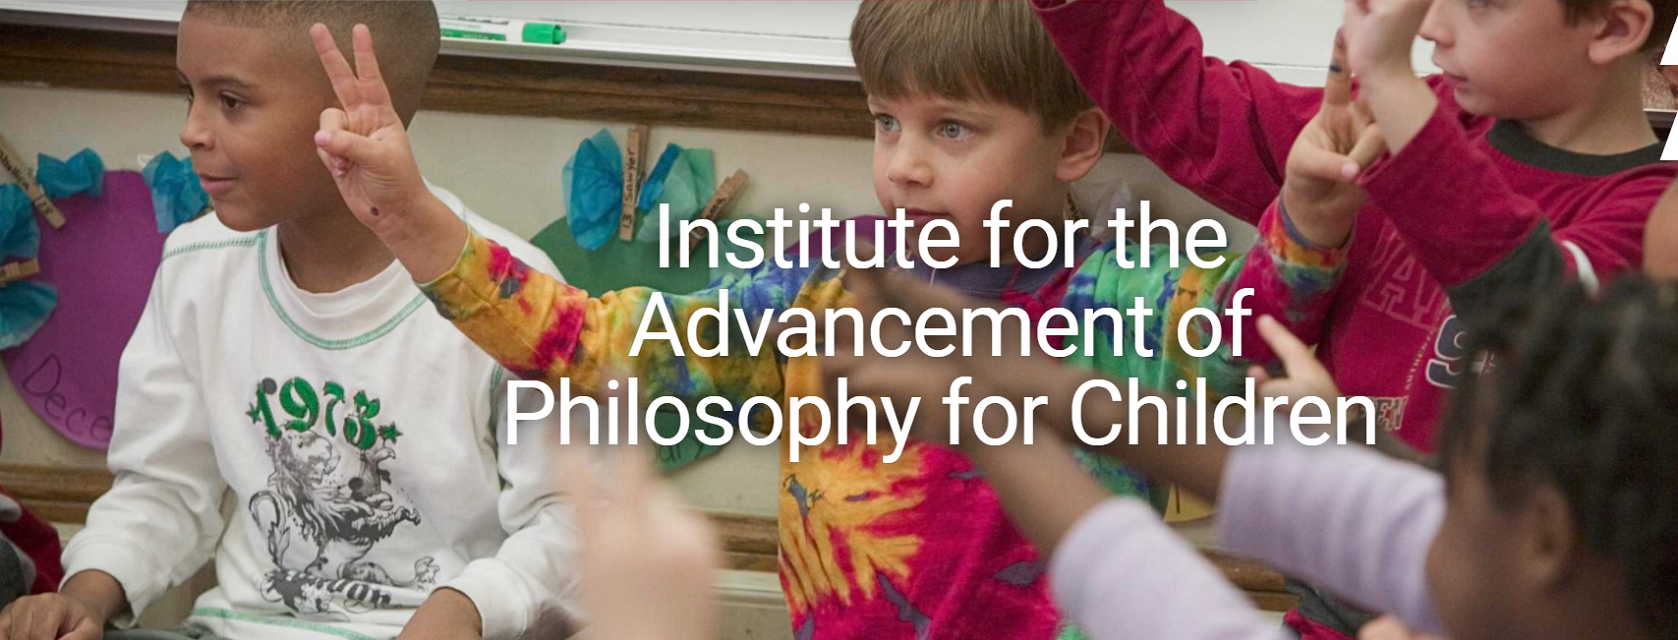 Institute for the Advancement of Philosophy for Children (IAPC)